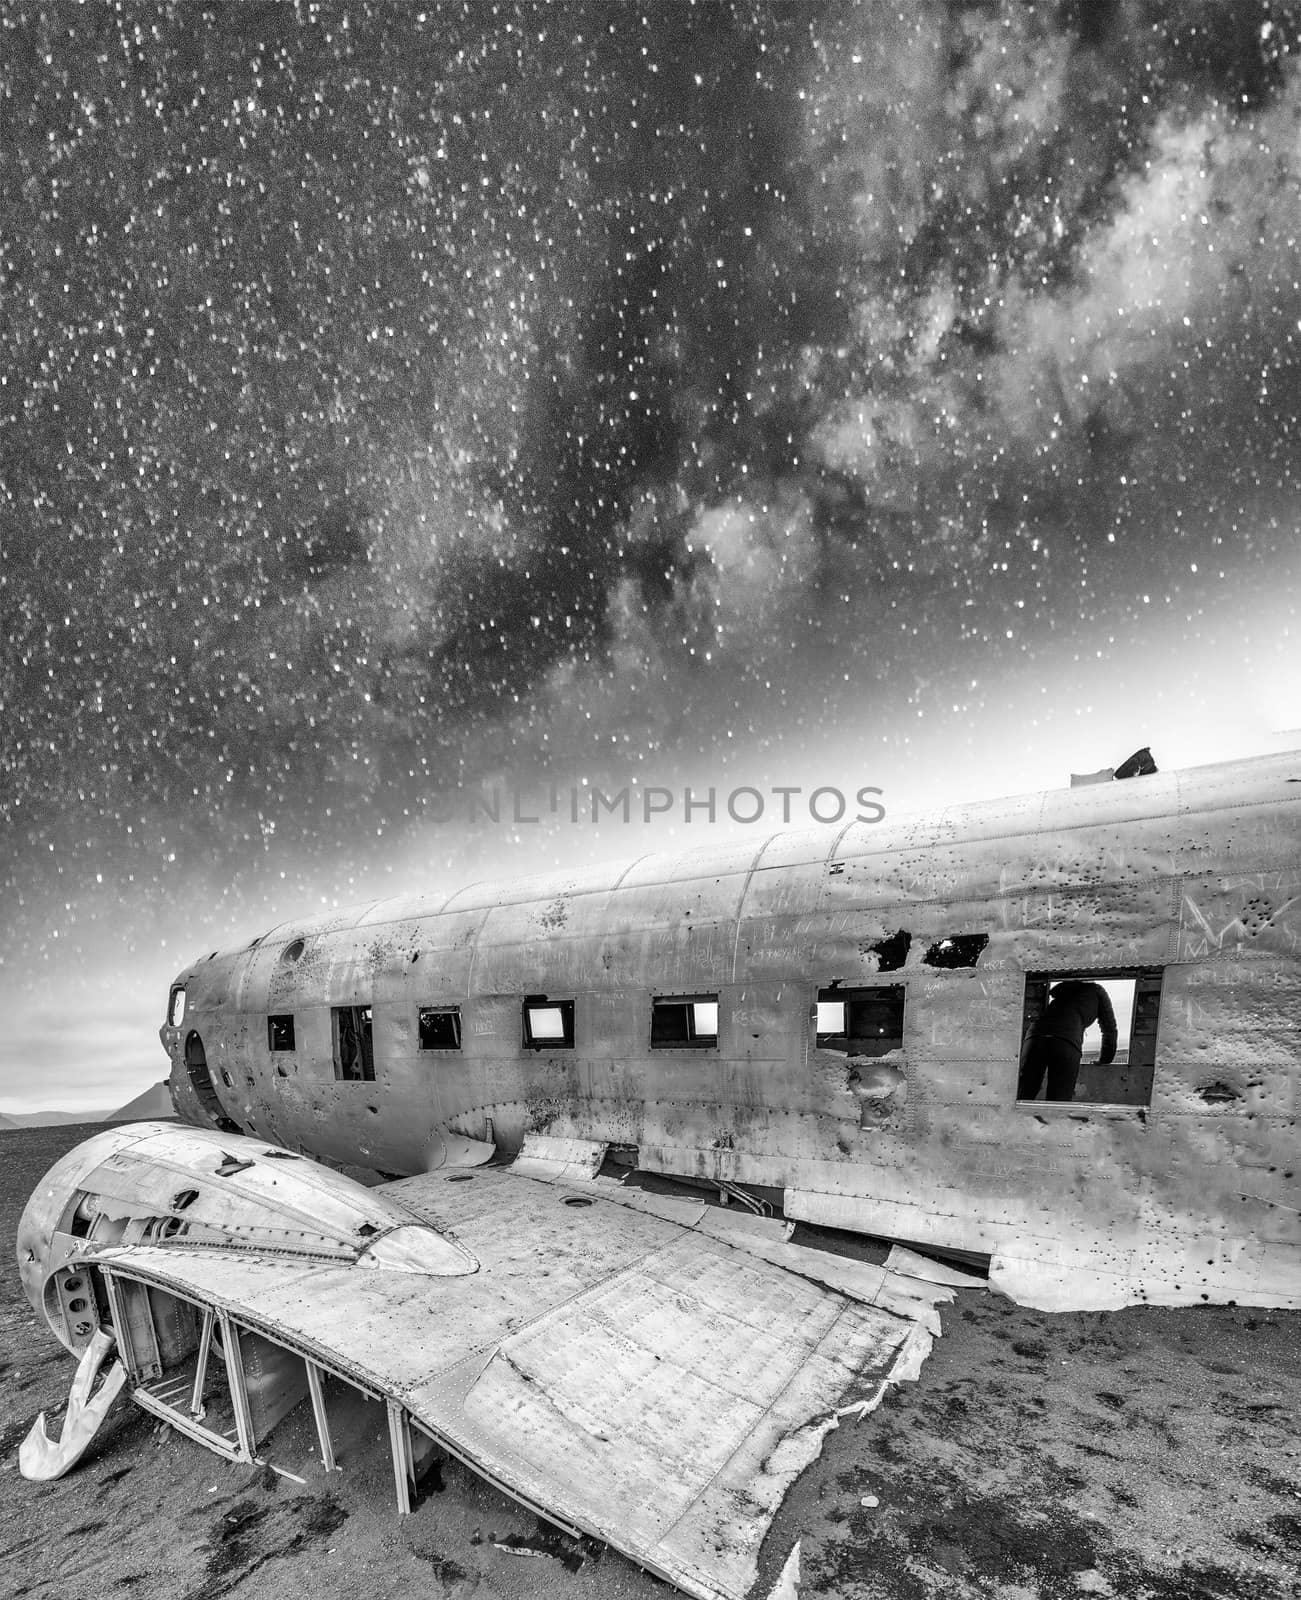 Abandoned wreckage of old aircraft on a beach under a starry night